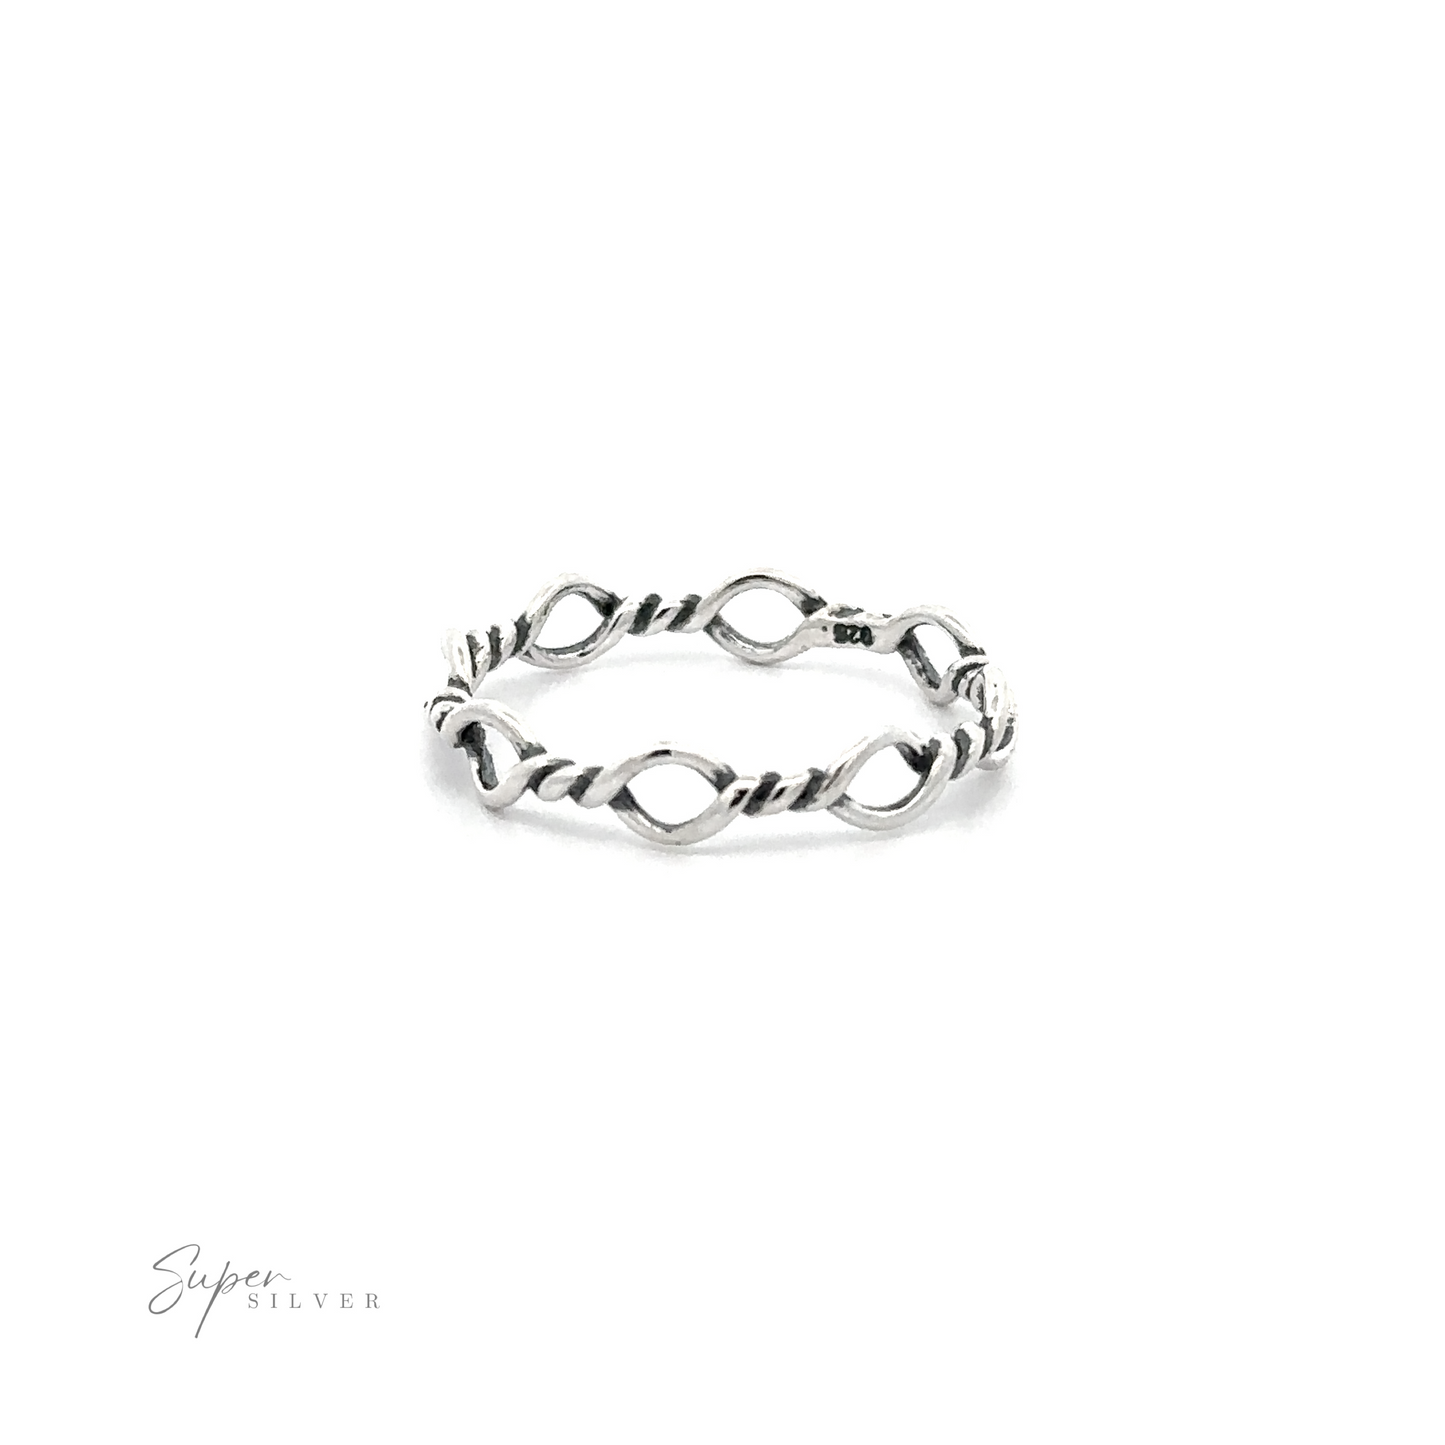 A Rope Ring crafted with .925 sterling silver, featuring twisted wires, and a high polish finish. It is showcased on a clean white background.